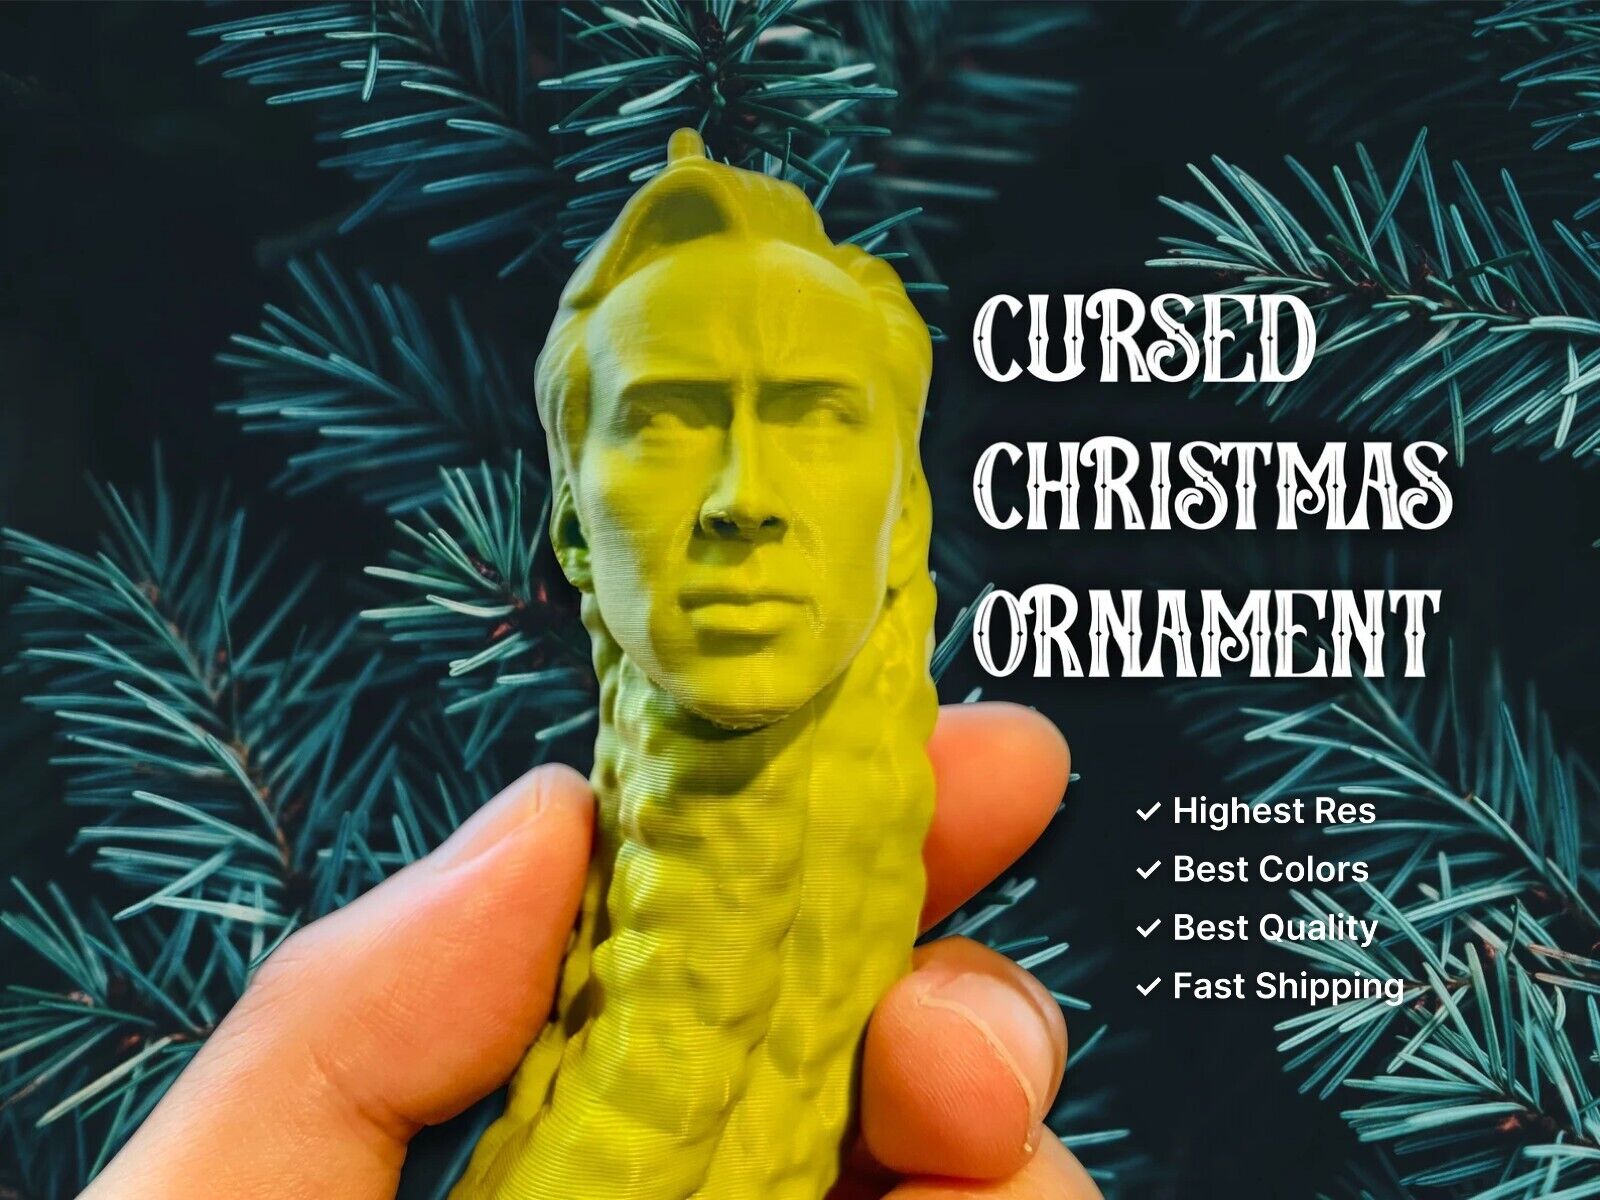 Picolas Cage Christmas Ornament - Cursed & Hilarious - win any gift exchange